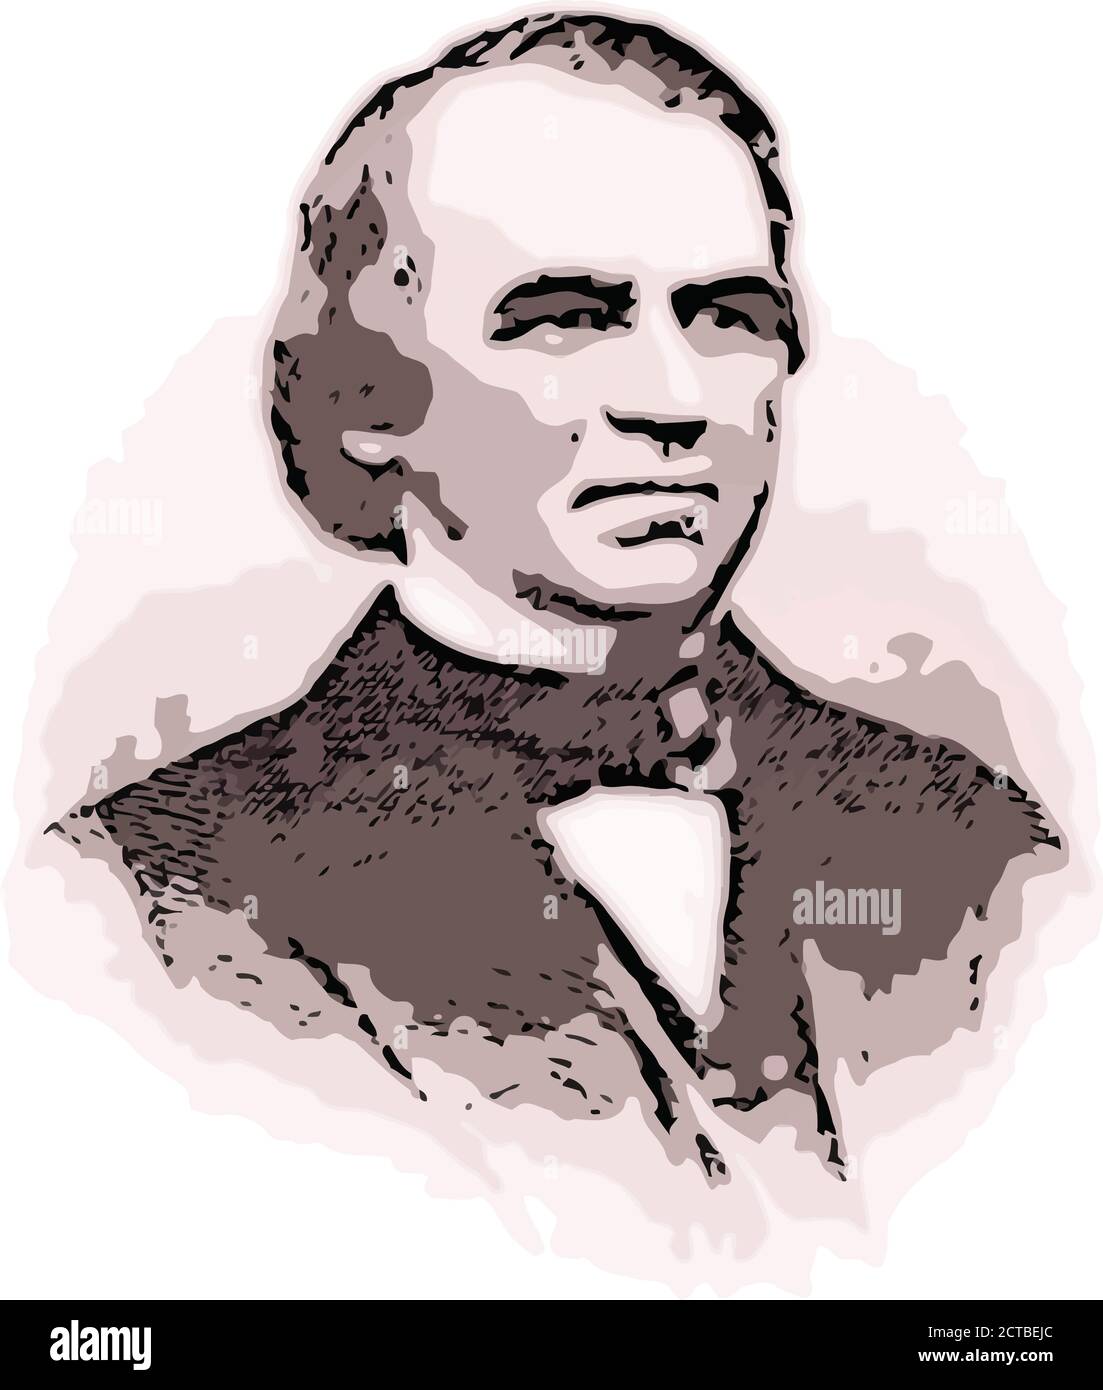 Vector portrait of president Andrew Johnson. Andrew Johnson (1808 – 1875) was the 17th president of the United States, serving from 1865 to 1869. He a Stock Vector